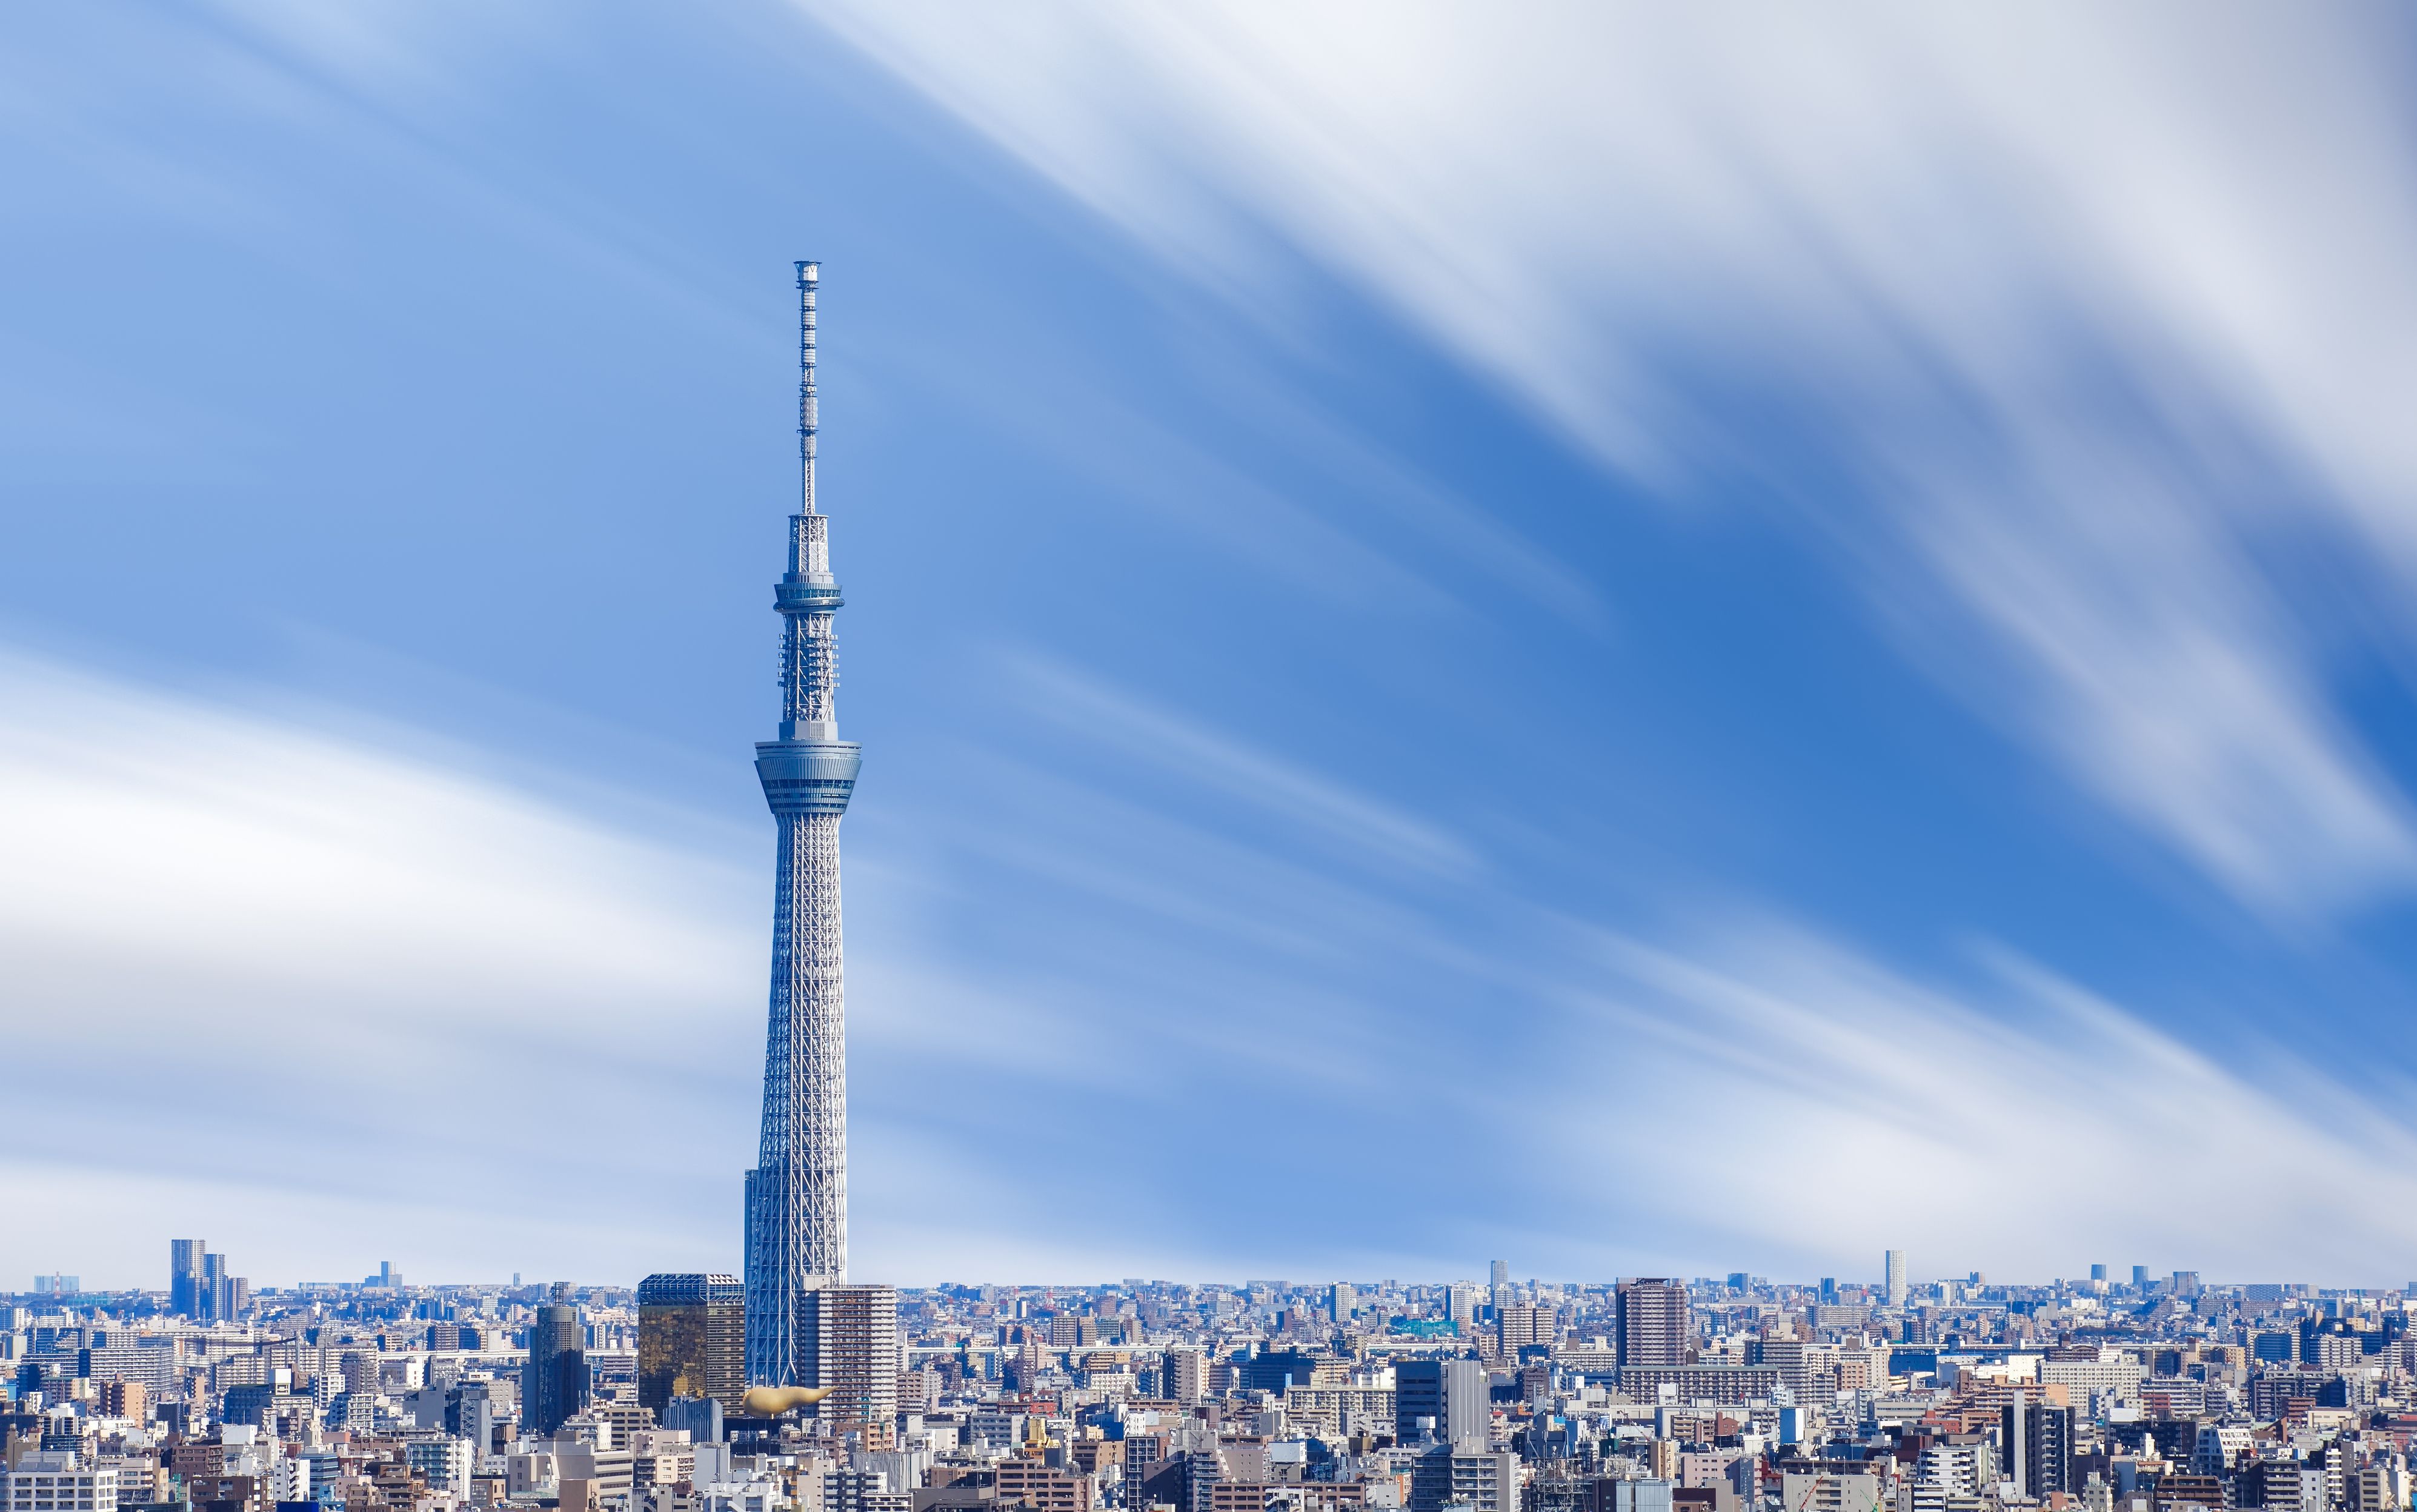 Tokyo Skytree: How to Save Money When Visiting Tokyo's Tallest Structure